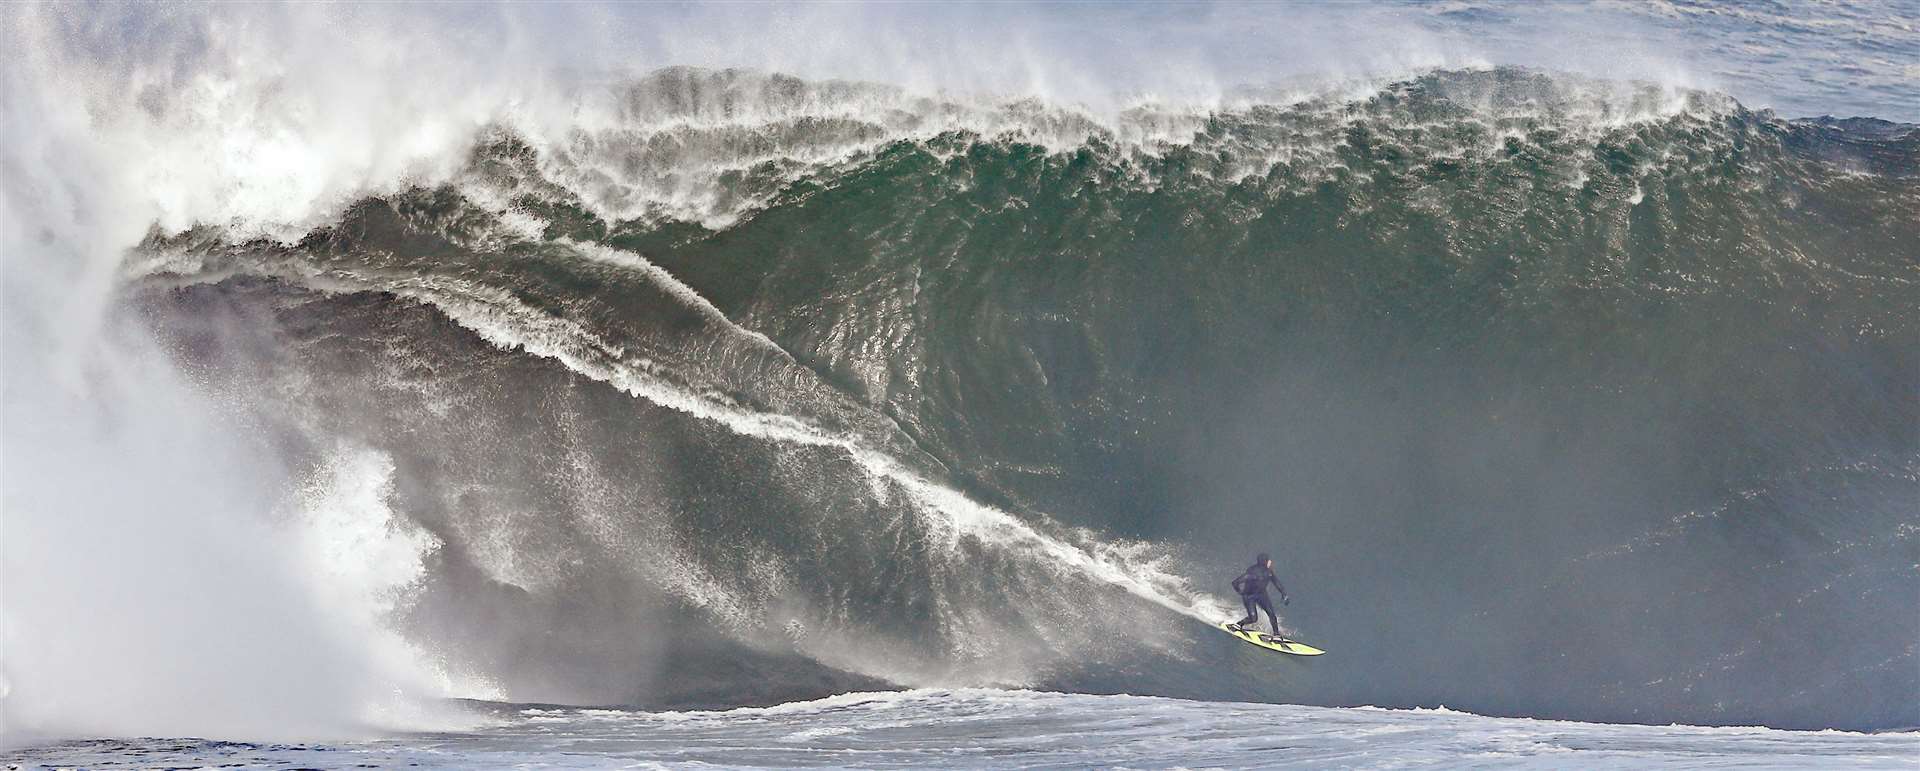 Surfers take to high waves caused by Atlantic swells in Mullaghmore in Co Sligo (Niall Carson/PA).